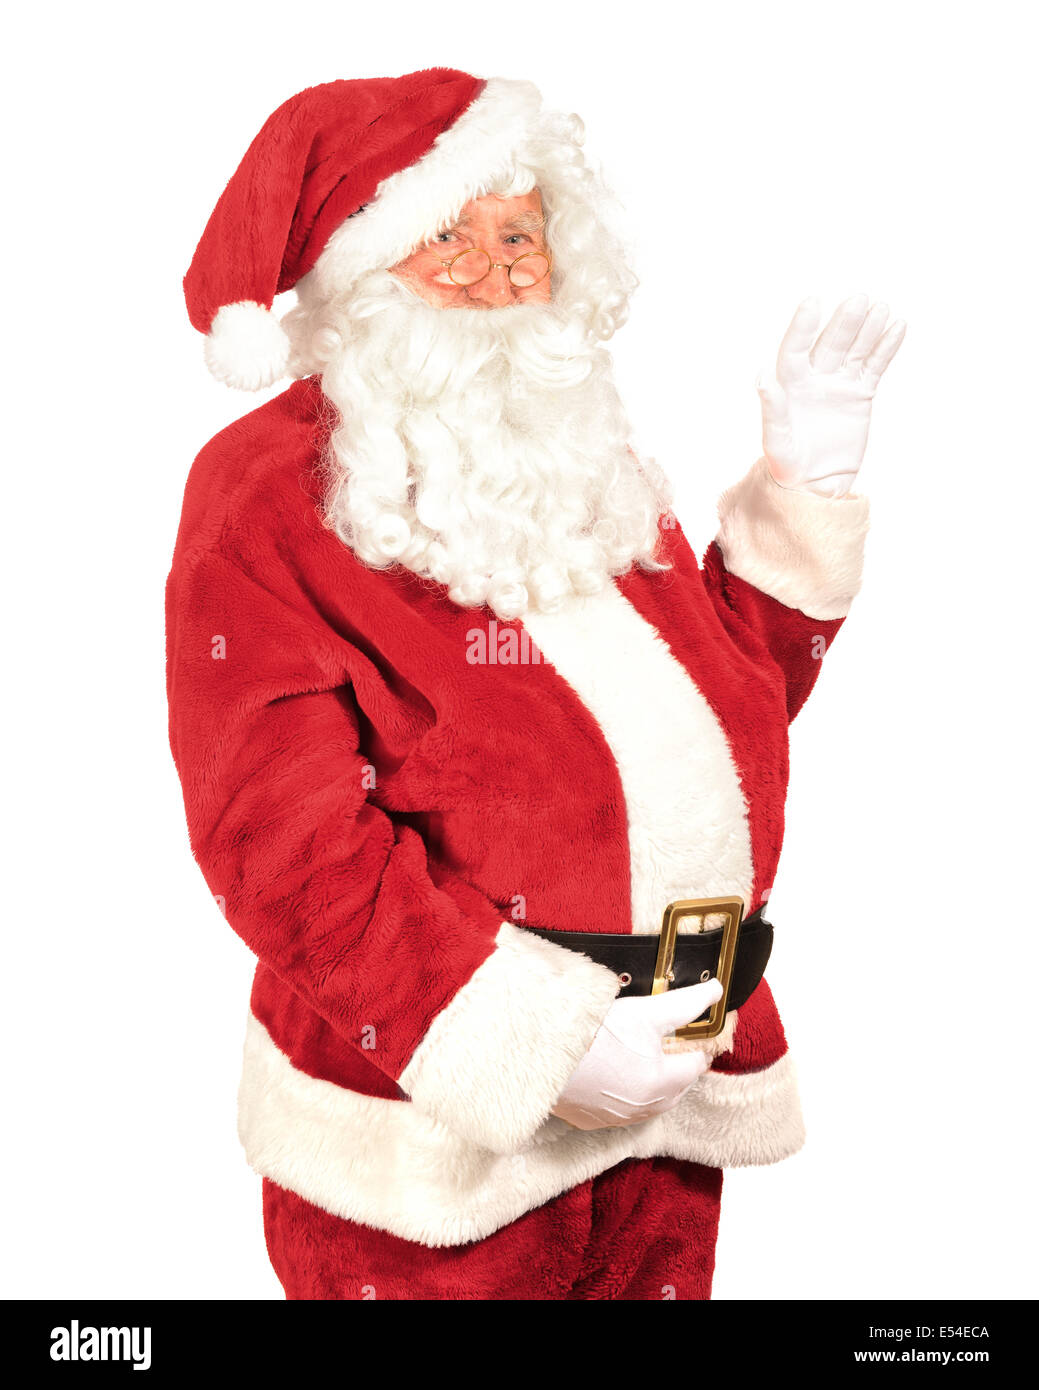 Santa Claus waving his hand on a white background Stock Photo